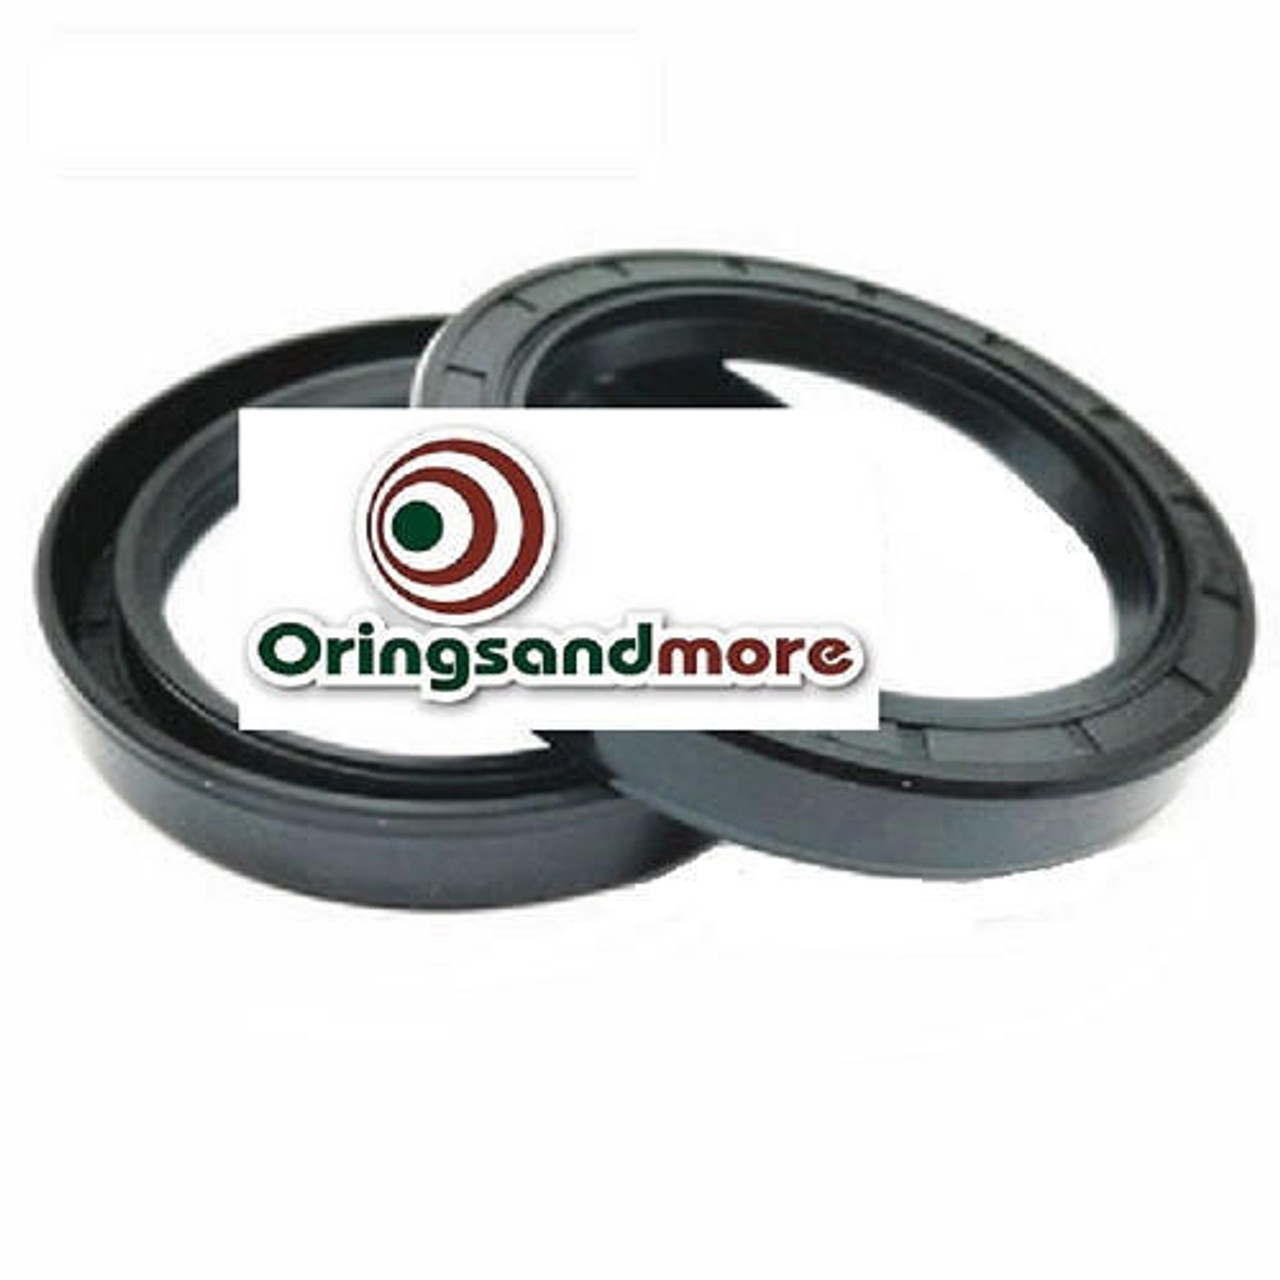 Metric Oil Shaft Seal 12 x 25 x 8mm Double Lip   Price for 1 pc